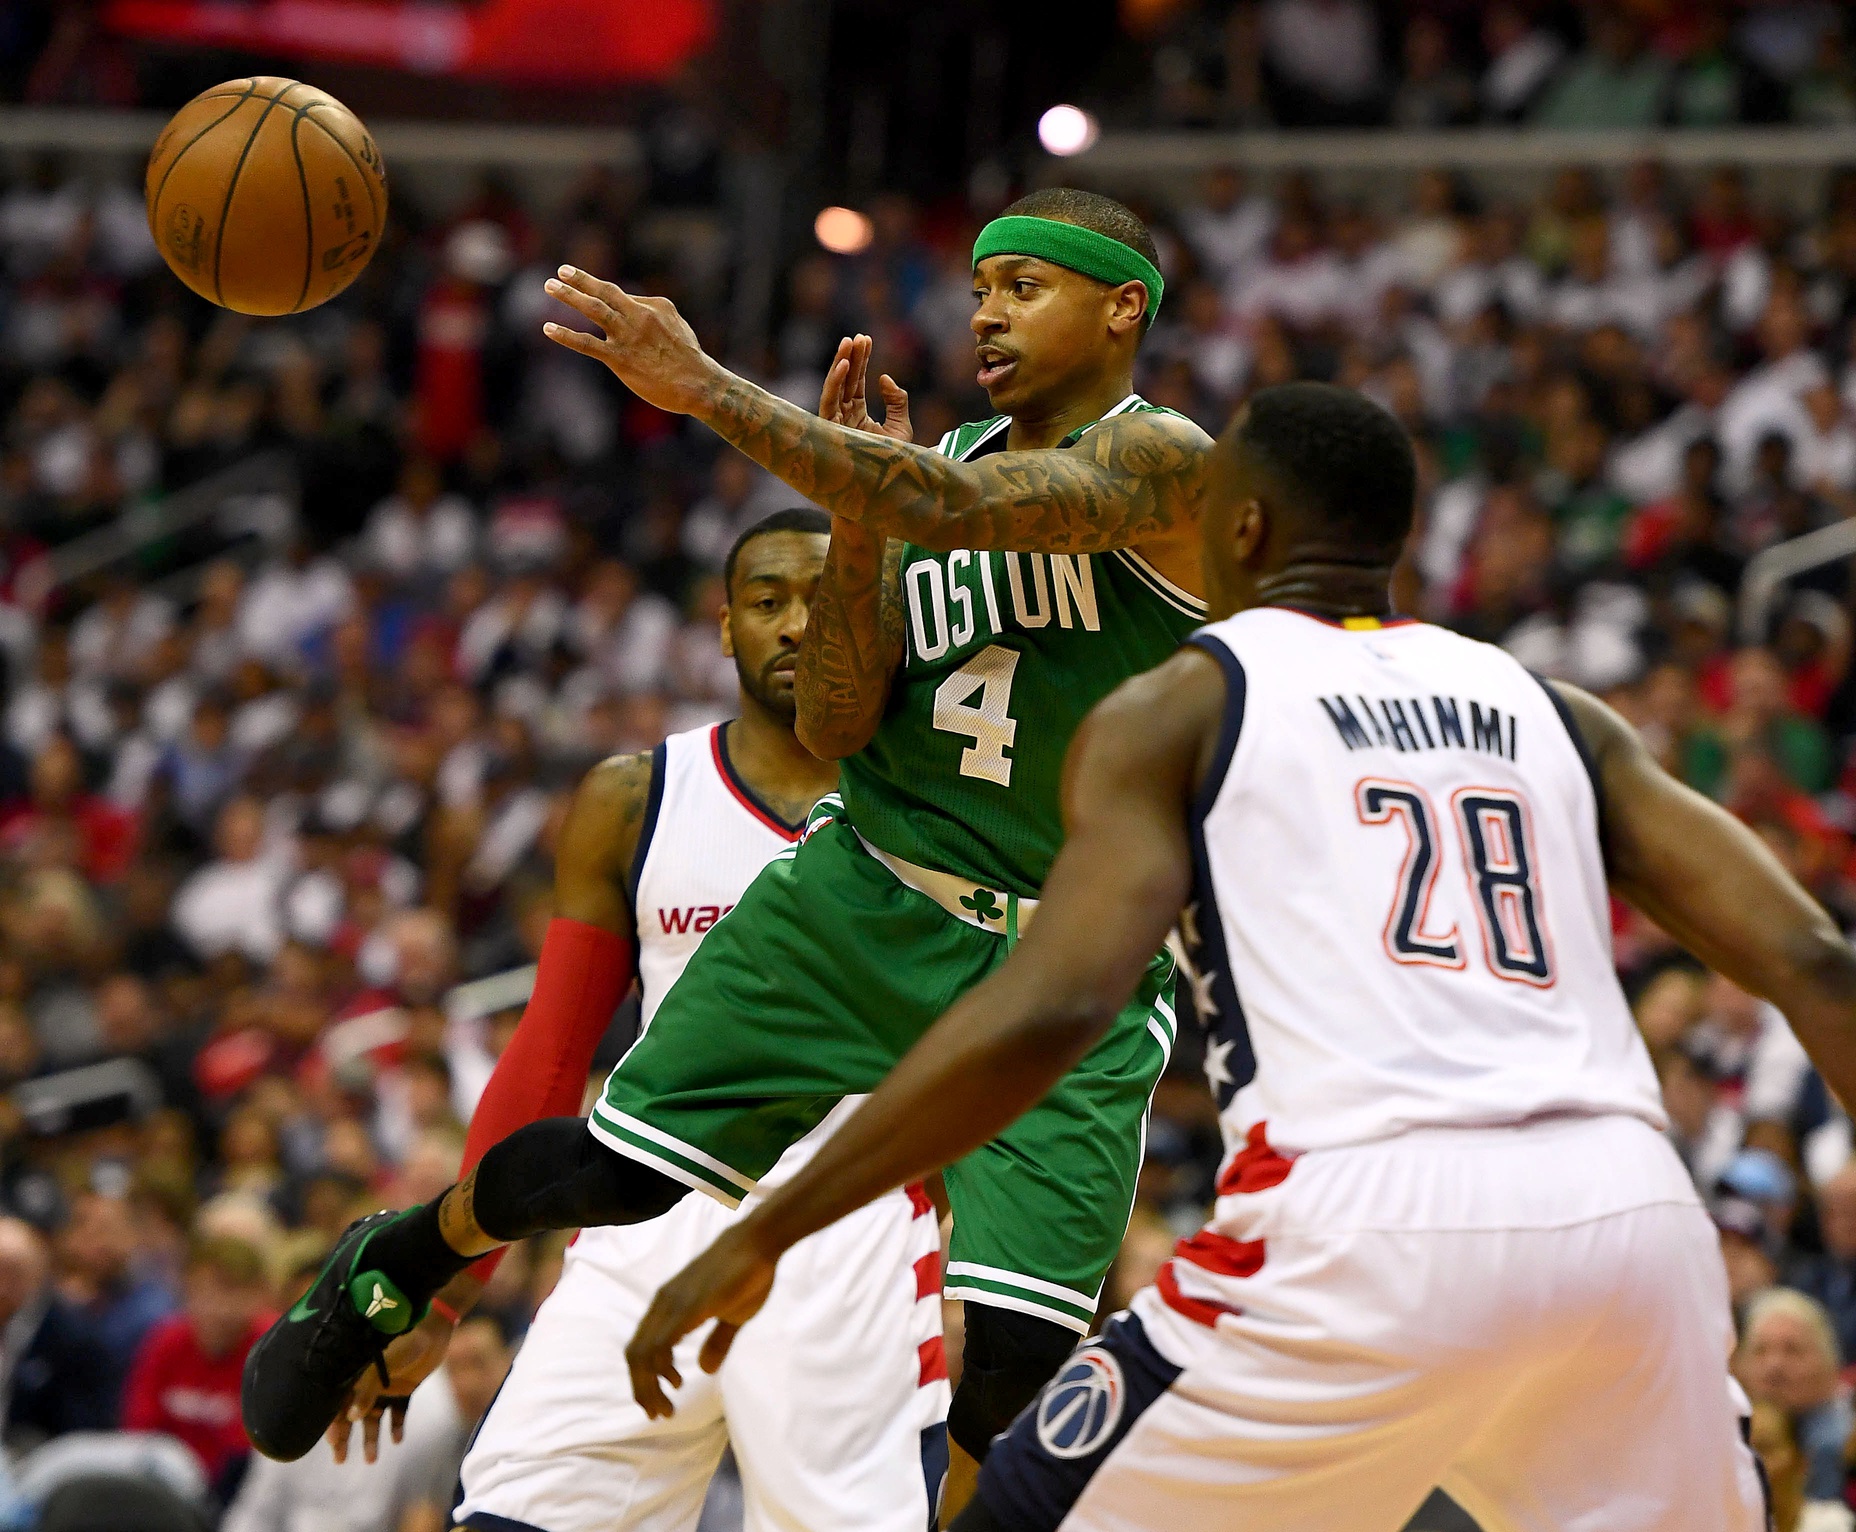 Boston Celtics guard Isaiah Thomas (4) passes the ball between Washington Wizards center Ian Mahinmi (28) and guard John Wall (2) during the second quarter in game four of the second round of the 2017 NBA Playoffs at Verizon Center.